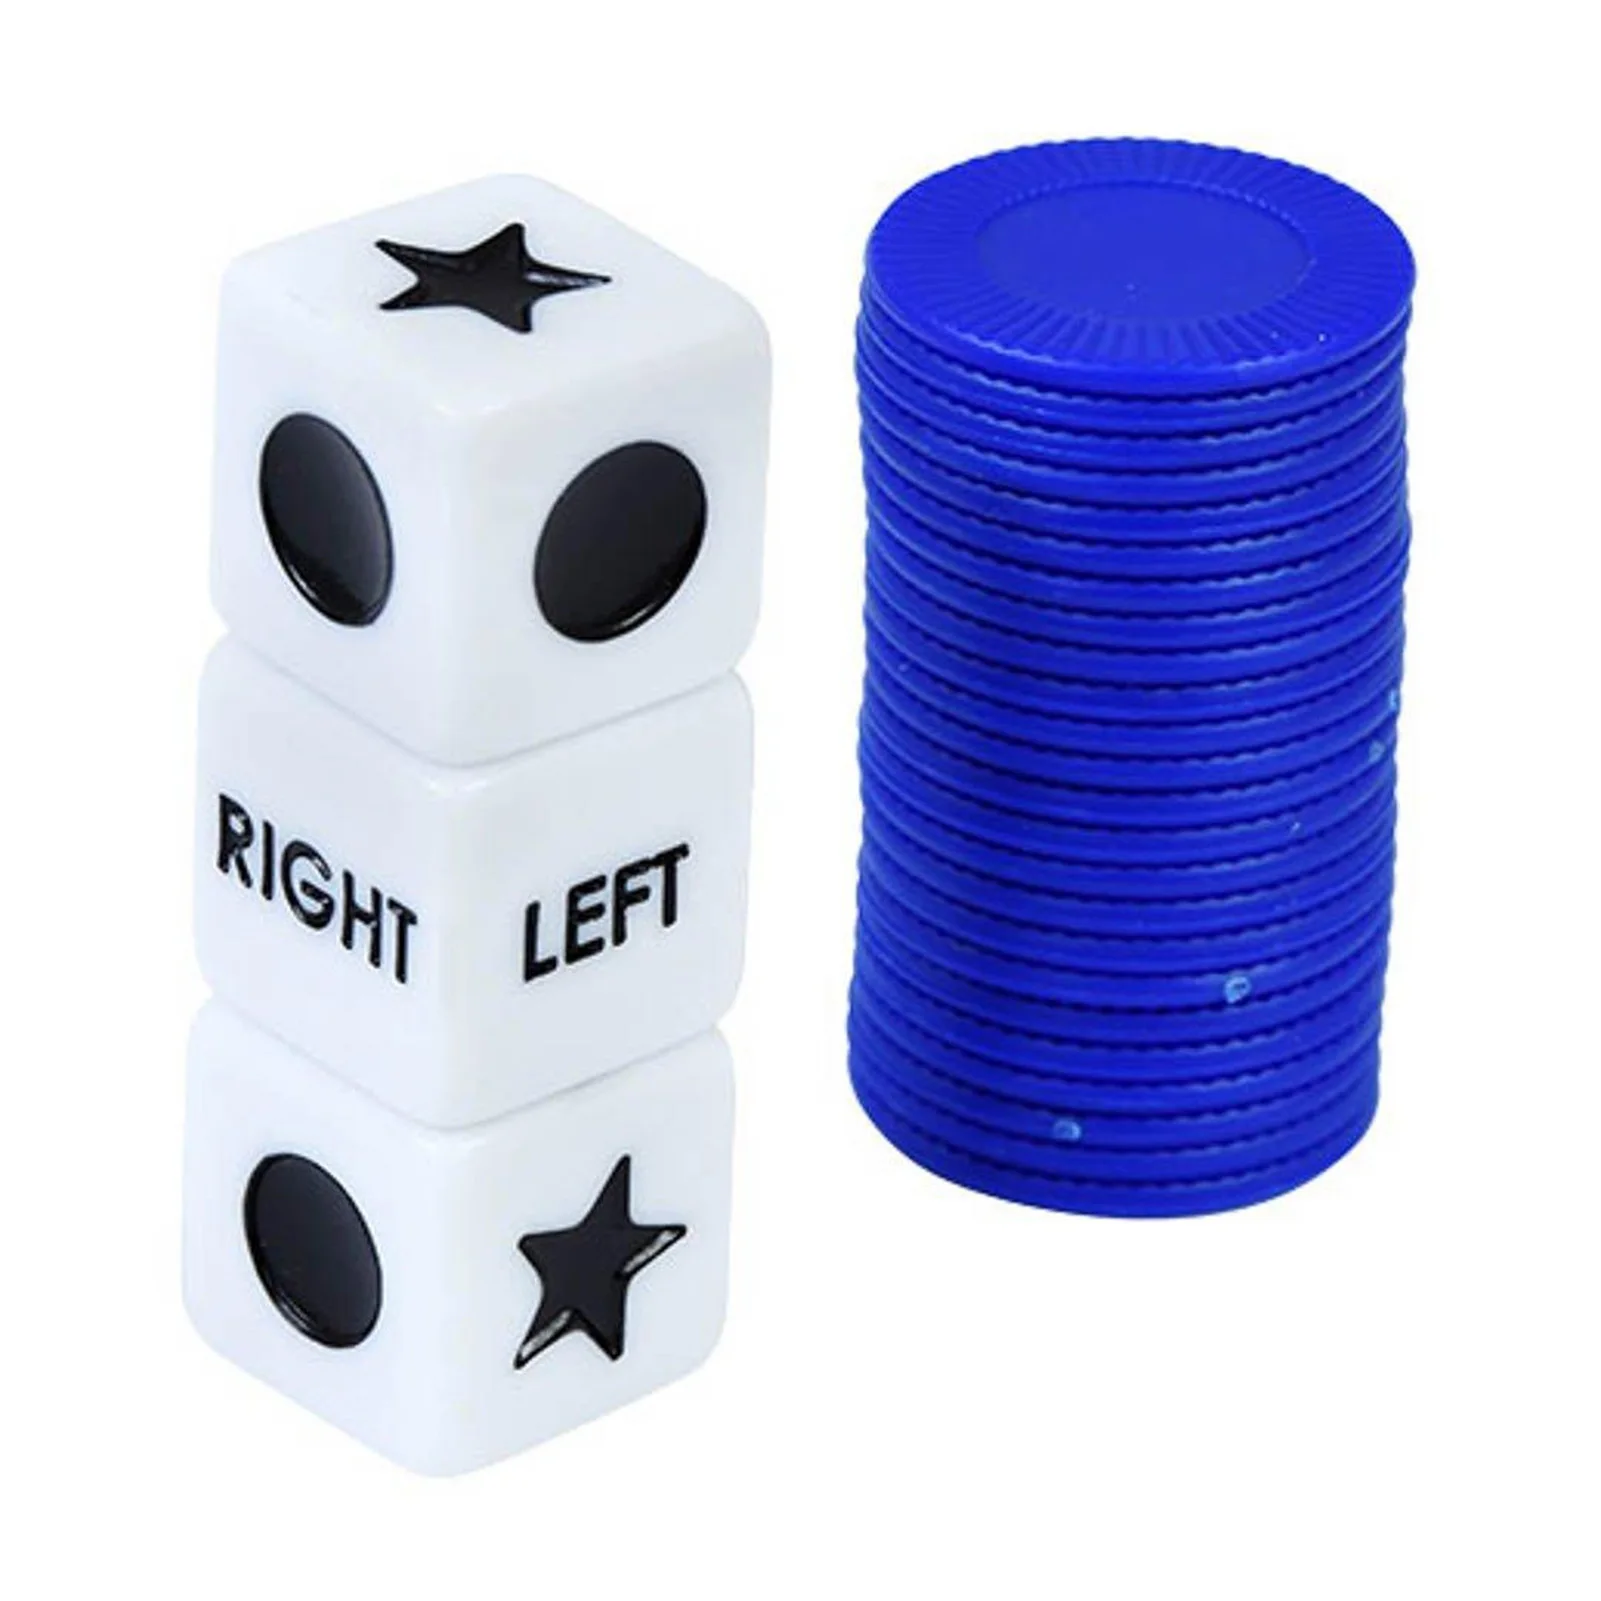 

Left Right Center Dice Game Innovative Left Right Center Table Game With 3 Dices And 24 Chips For Club Drinking Games Gatherings